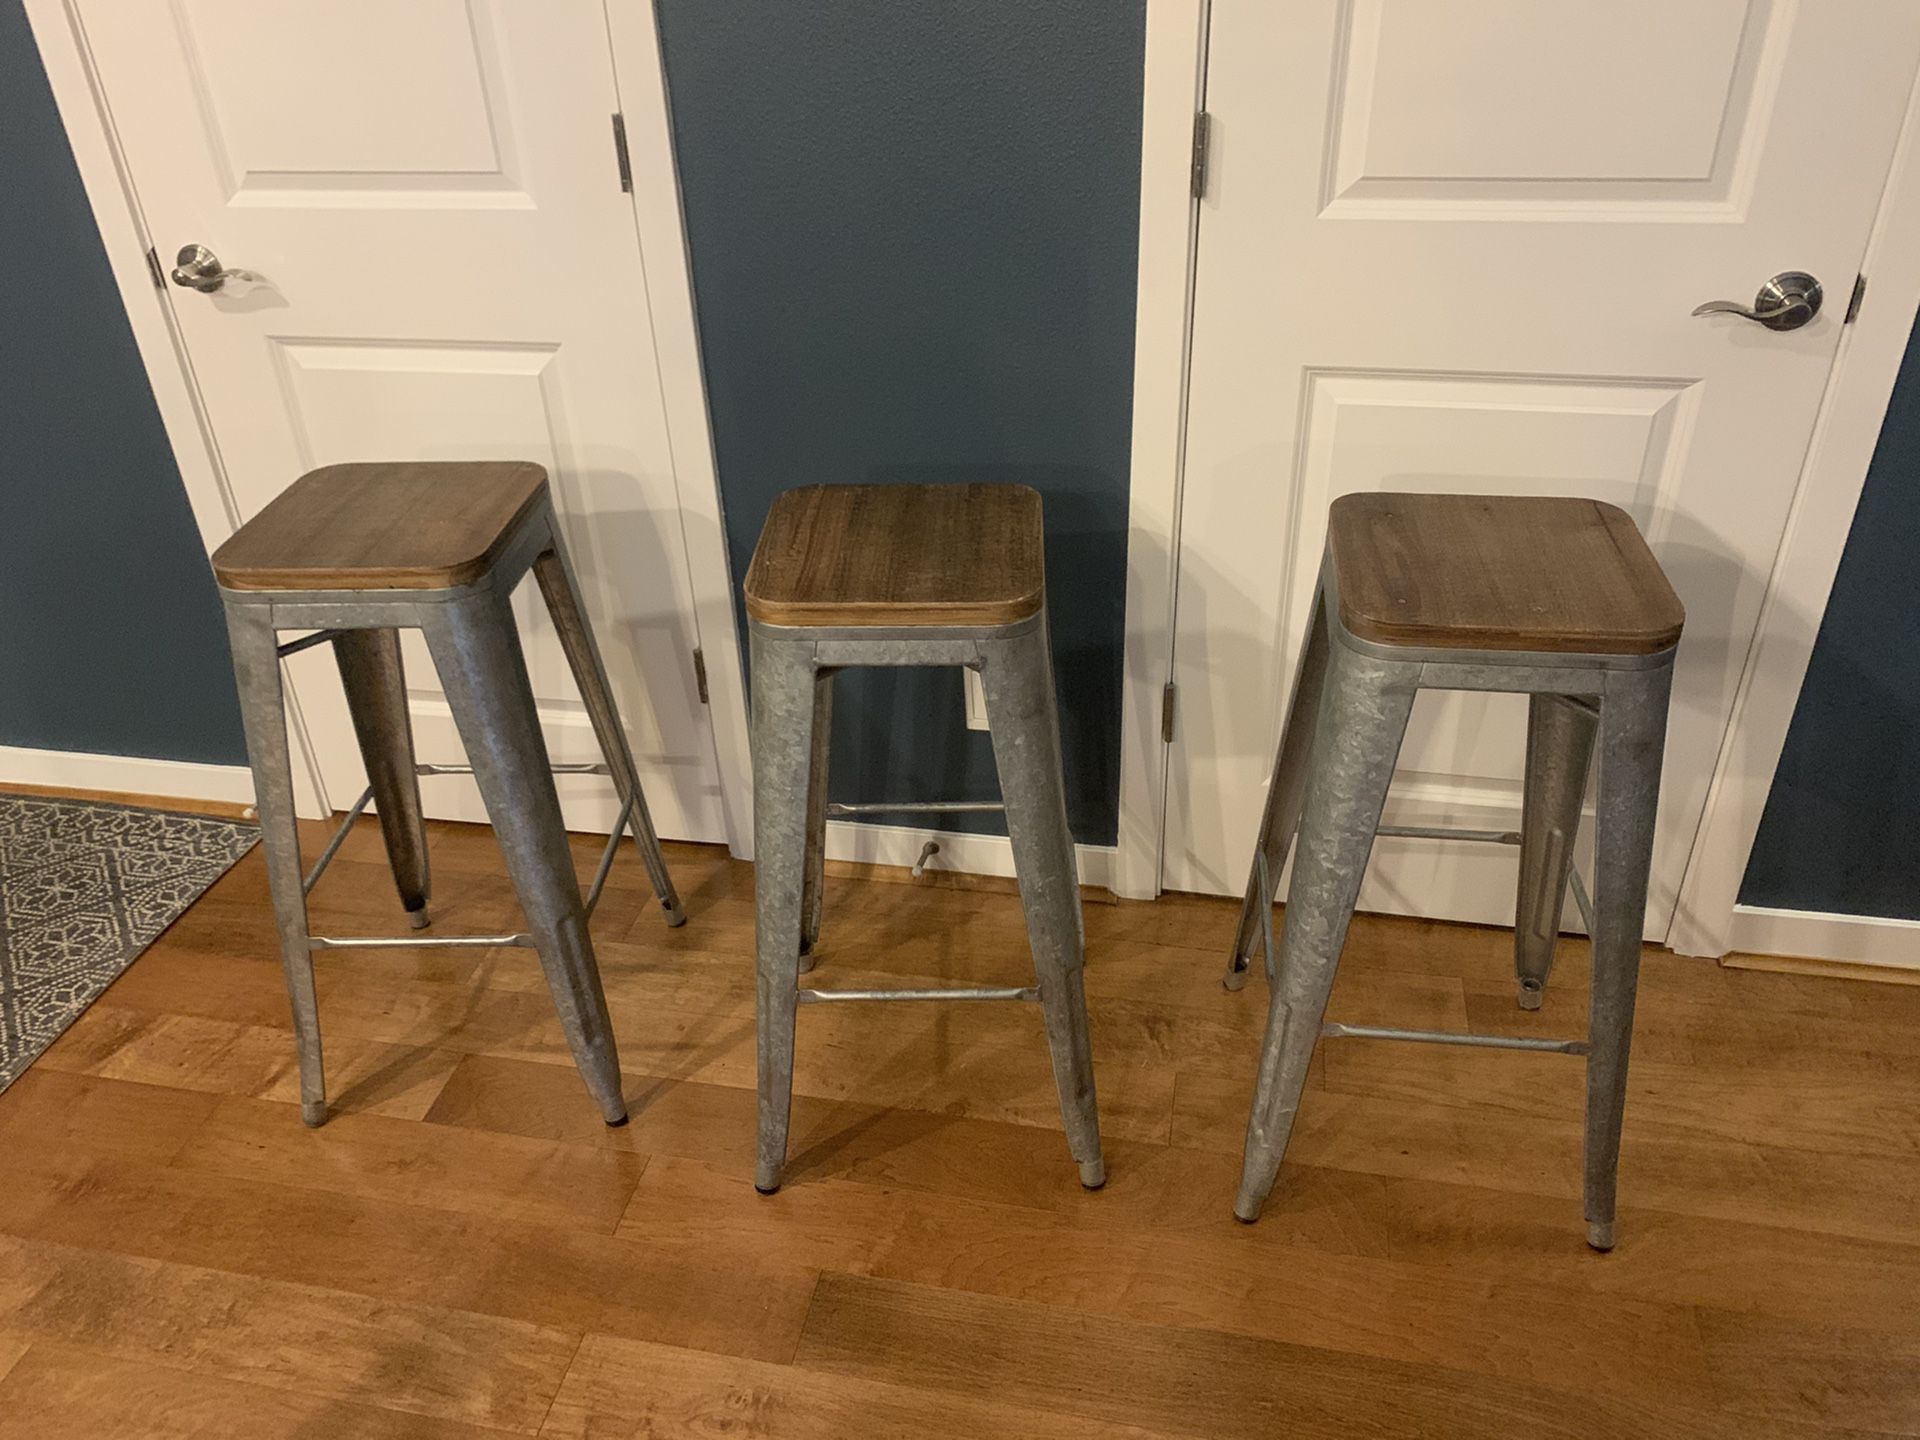 Bar stools, farmhouse style. Floor to seat height is 29.5”